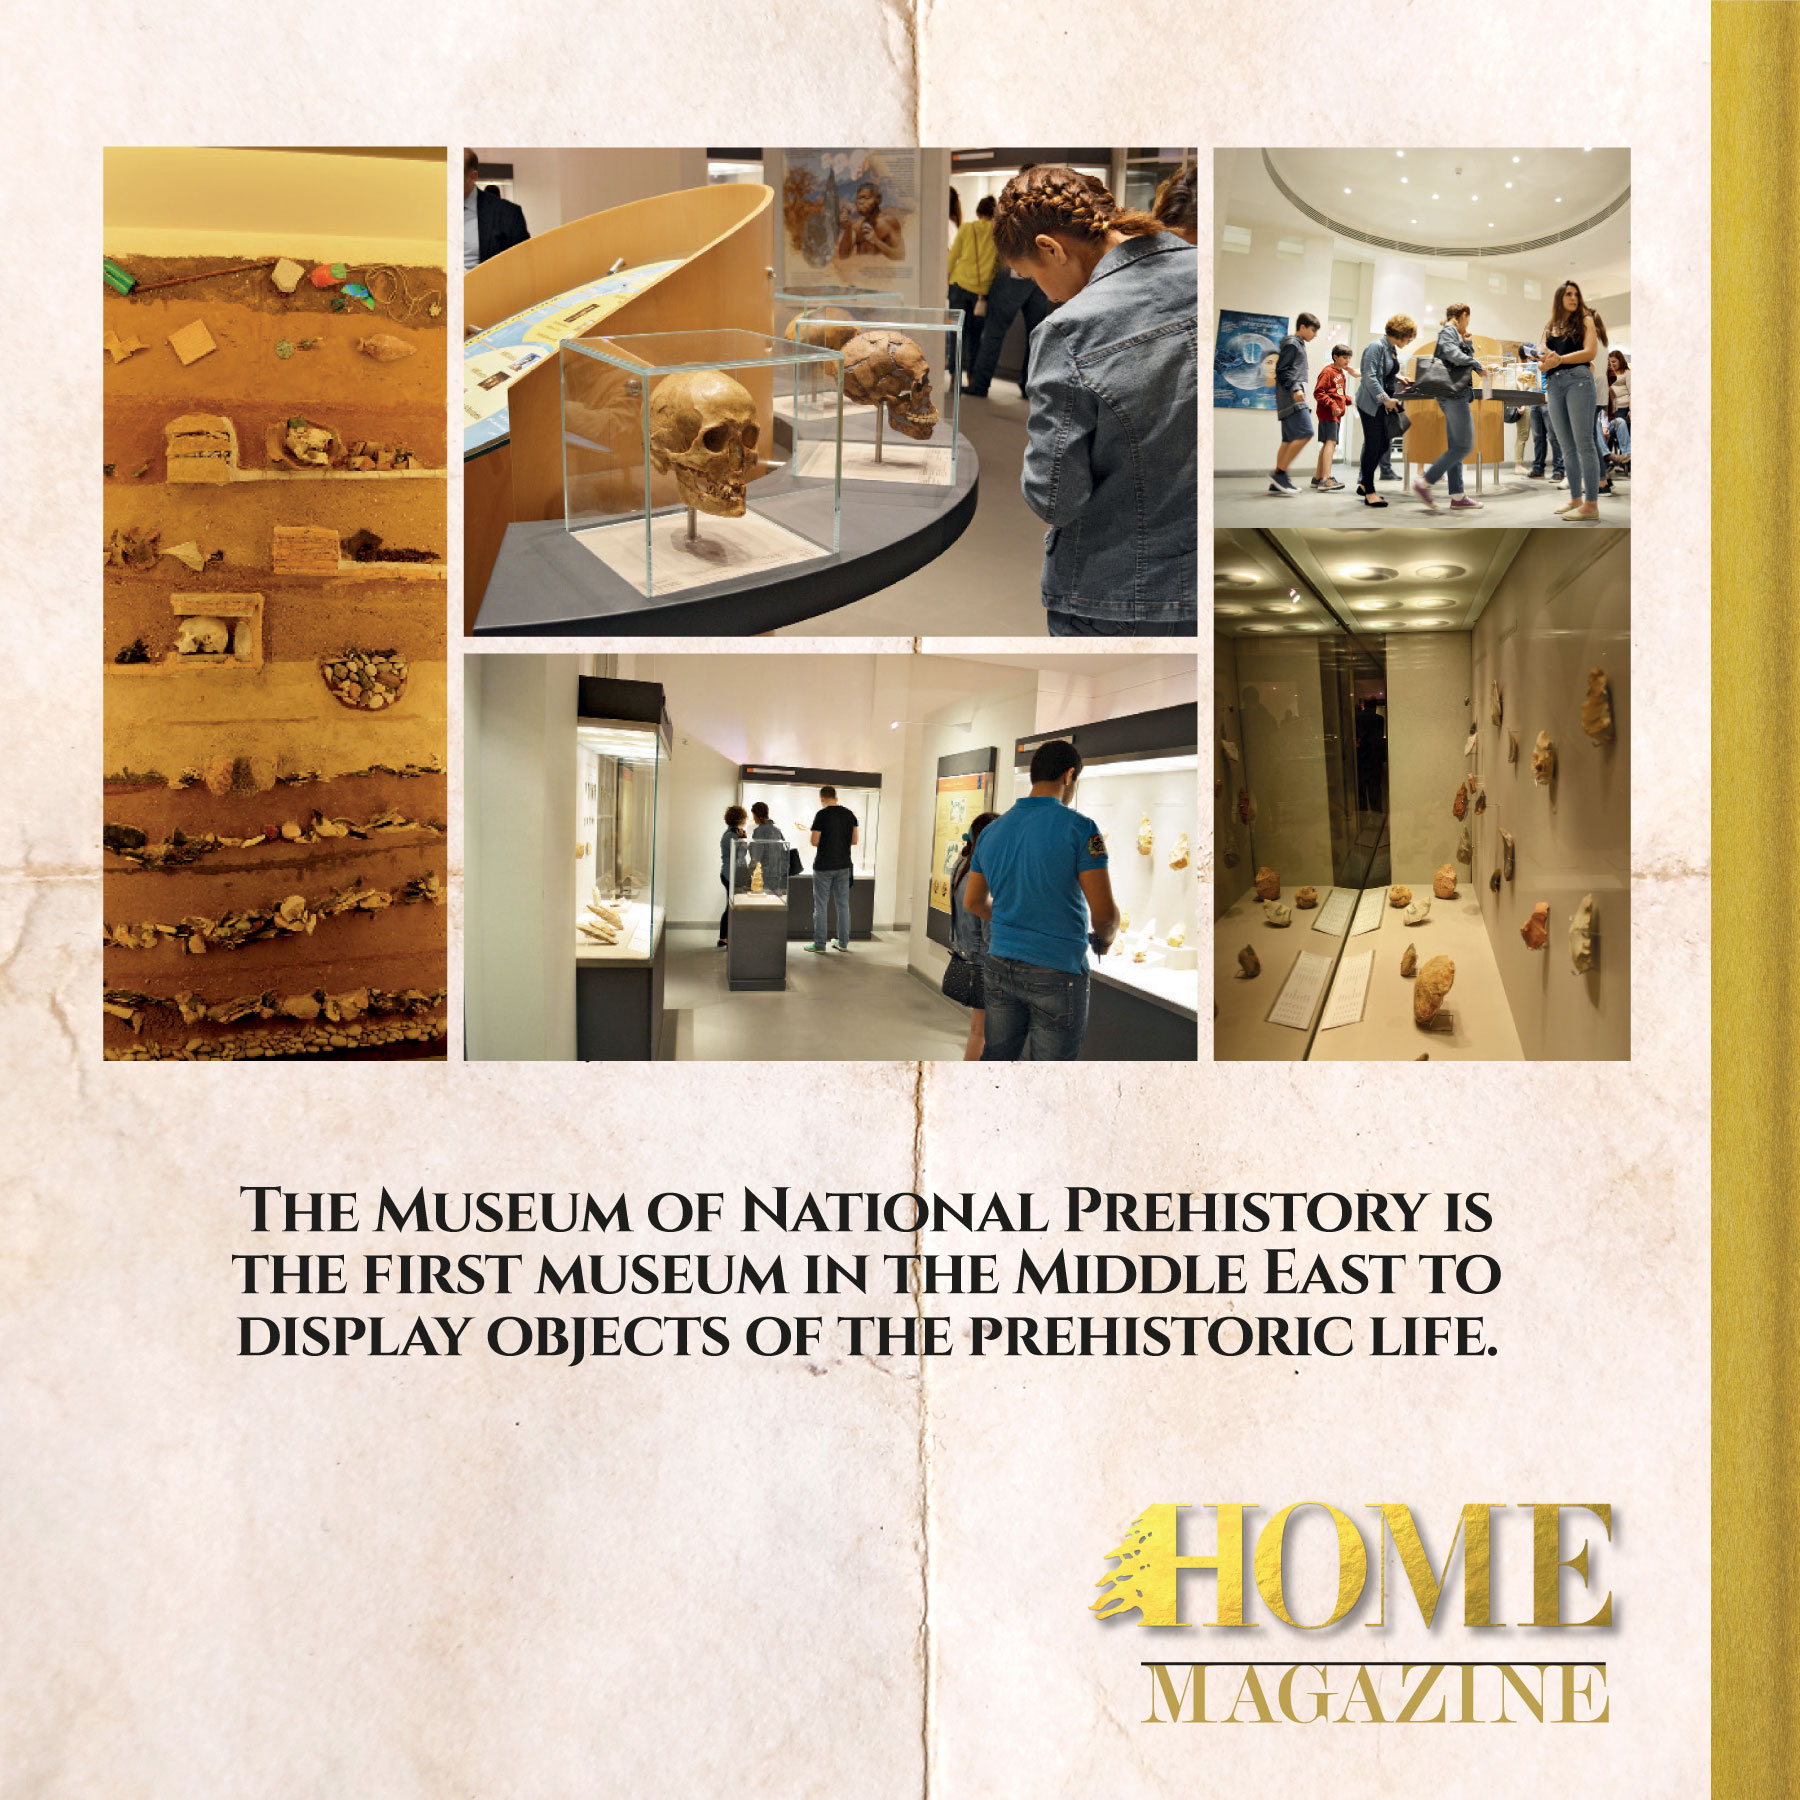 "The museum of natural prehistory is the first museum in the middle east to display objects of the prehistoric life."